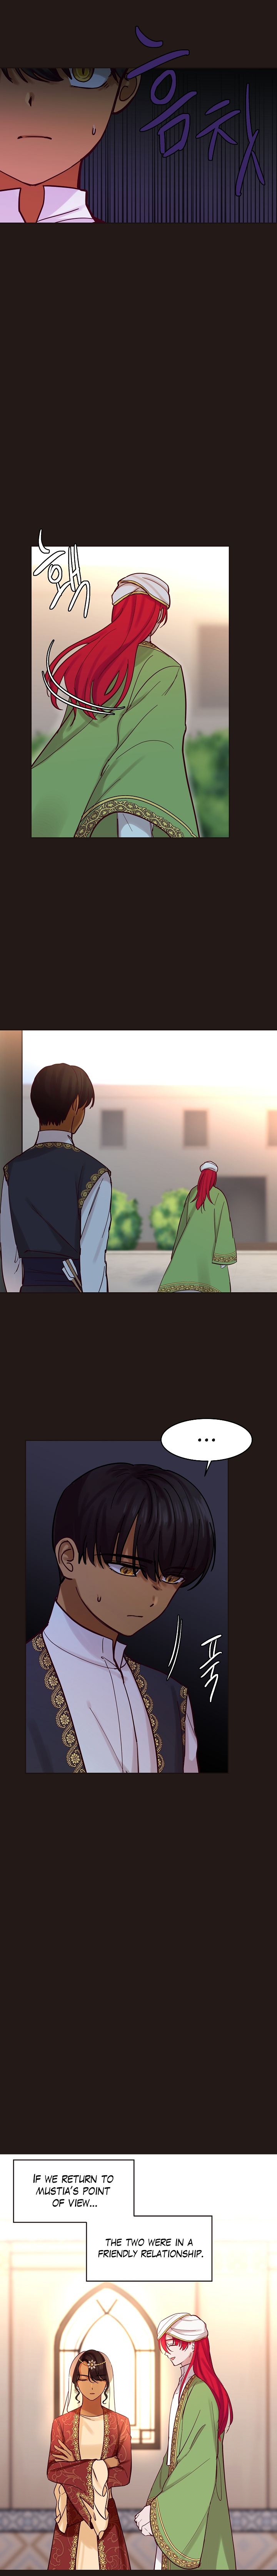 Amina Of The Lamp - Page 4